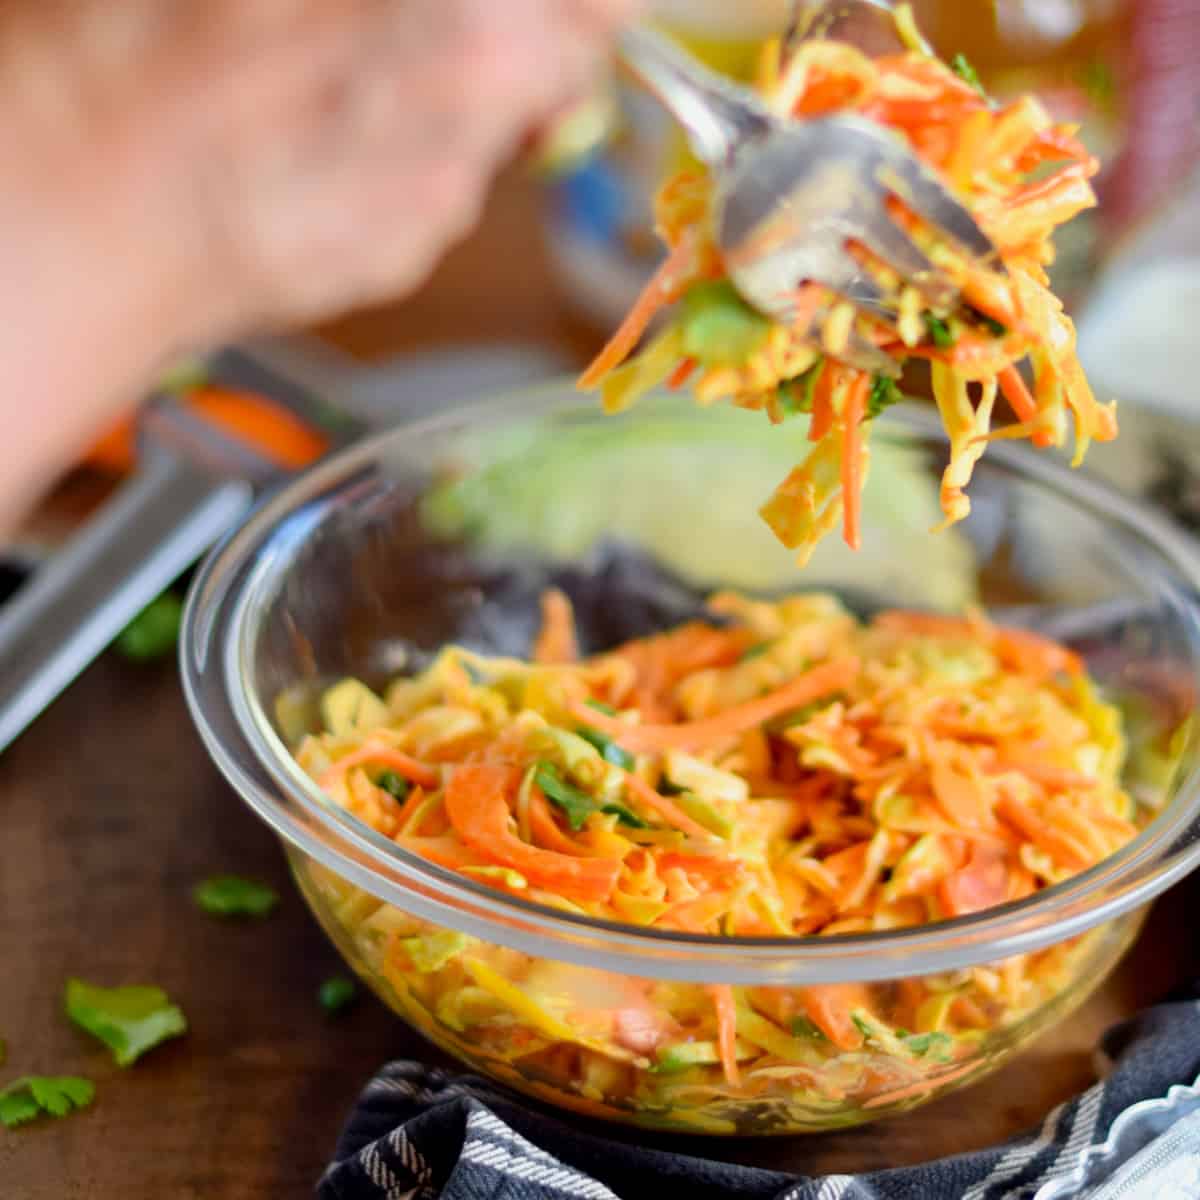 Serving some Coleslaw with Easy Homemade Sriracha Dressing from a glass bowl with a fork and spoon.